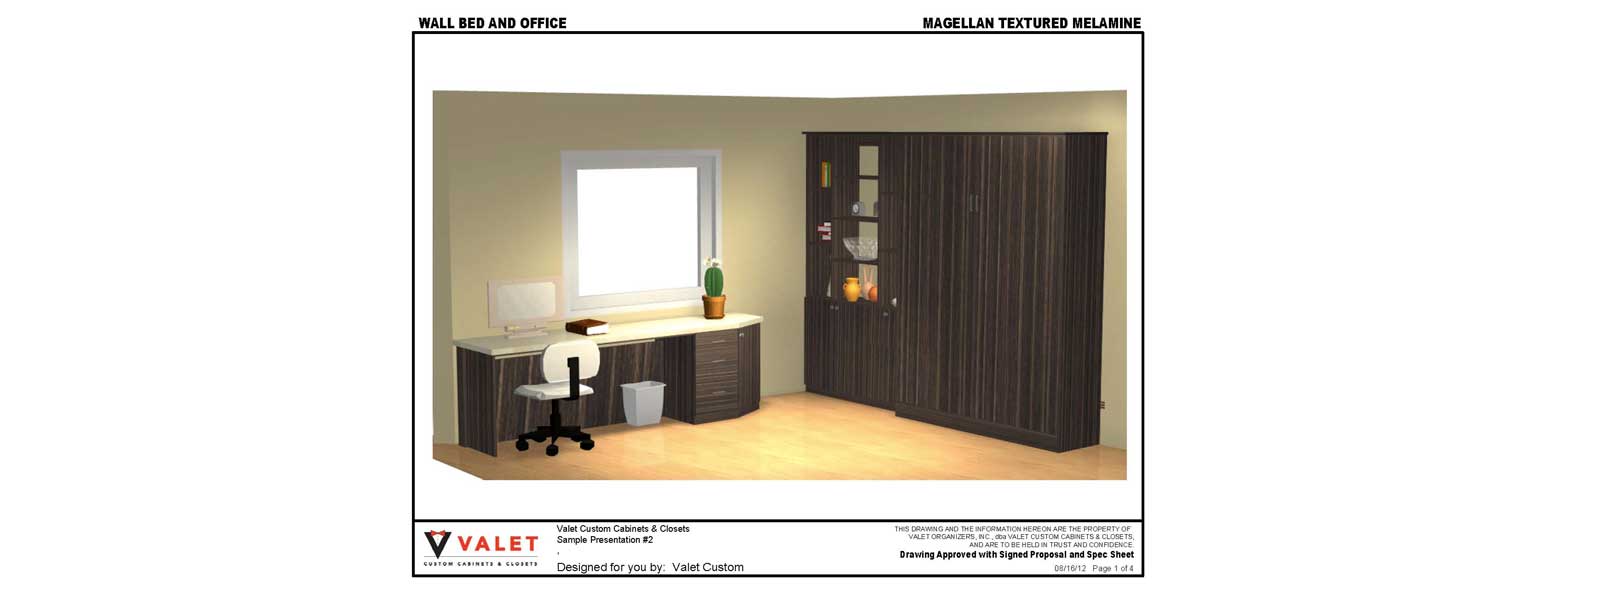 Design Examples Of Murphy Wall Beds By Valet